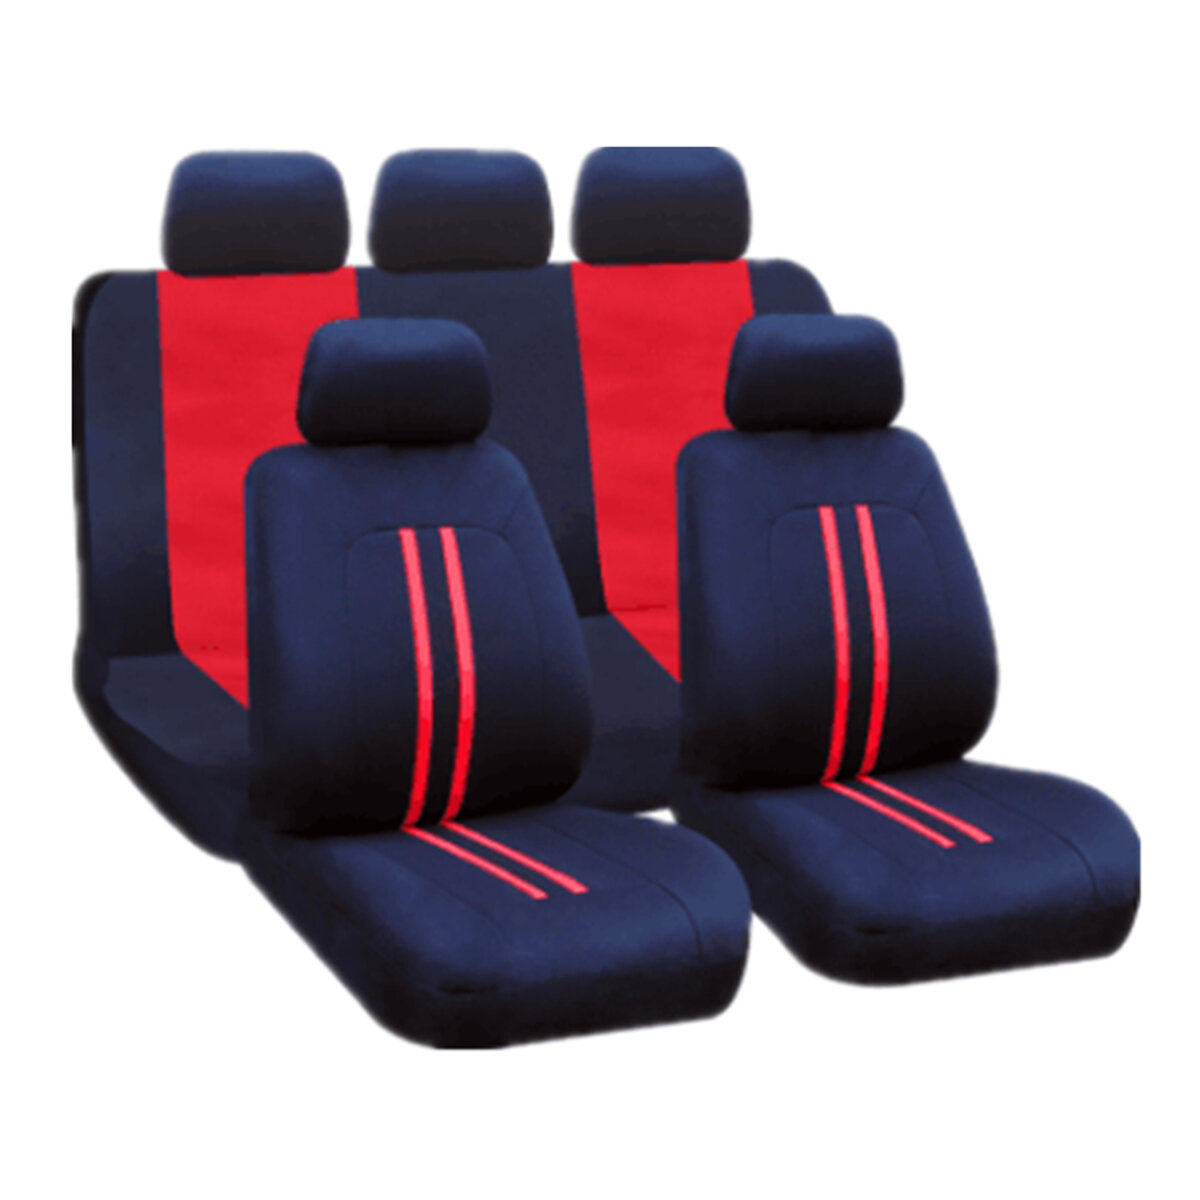 polyester fabric car front and back seat cover cushion protector